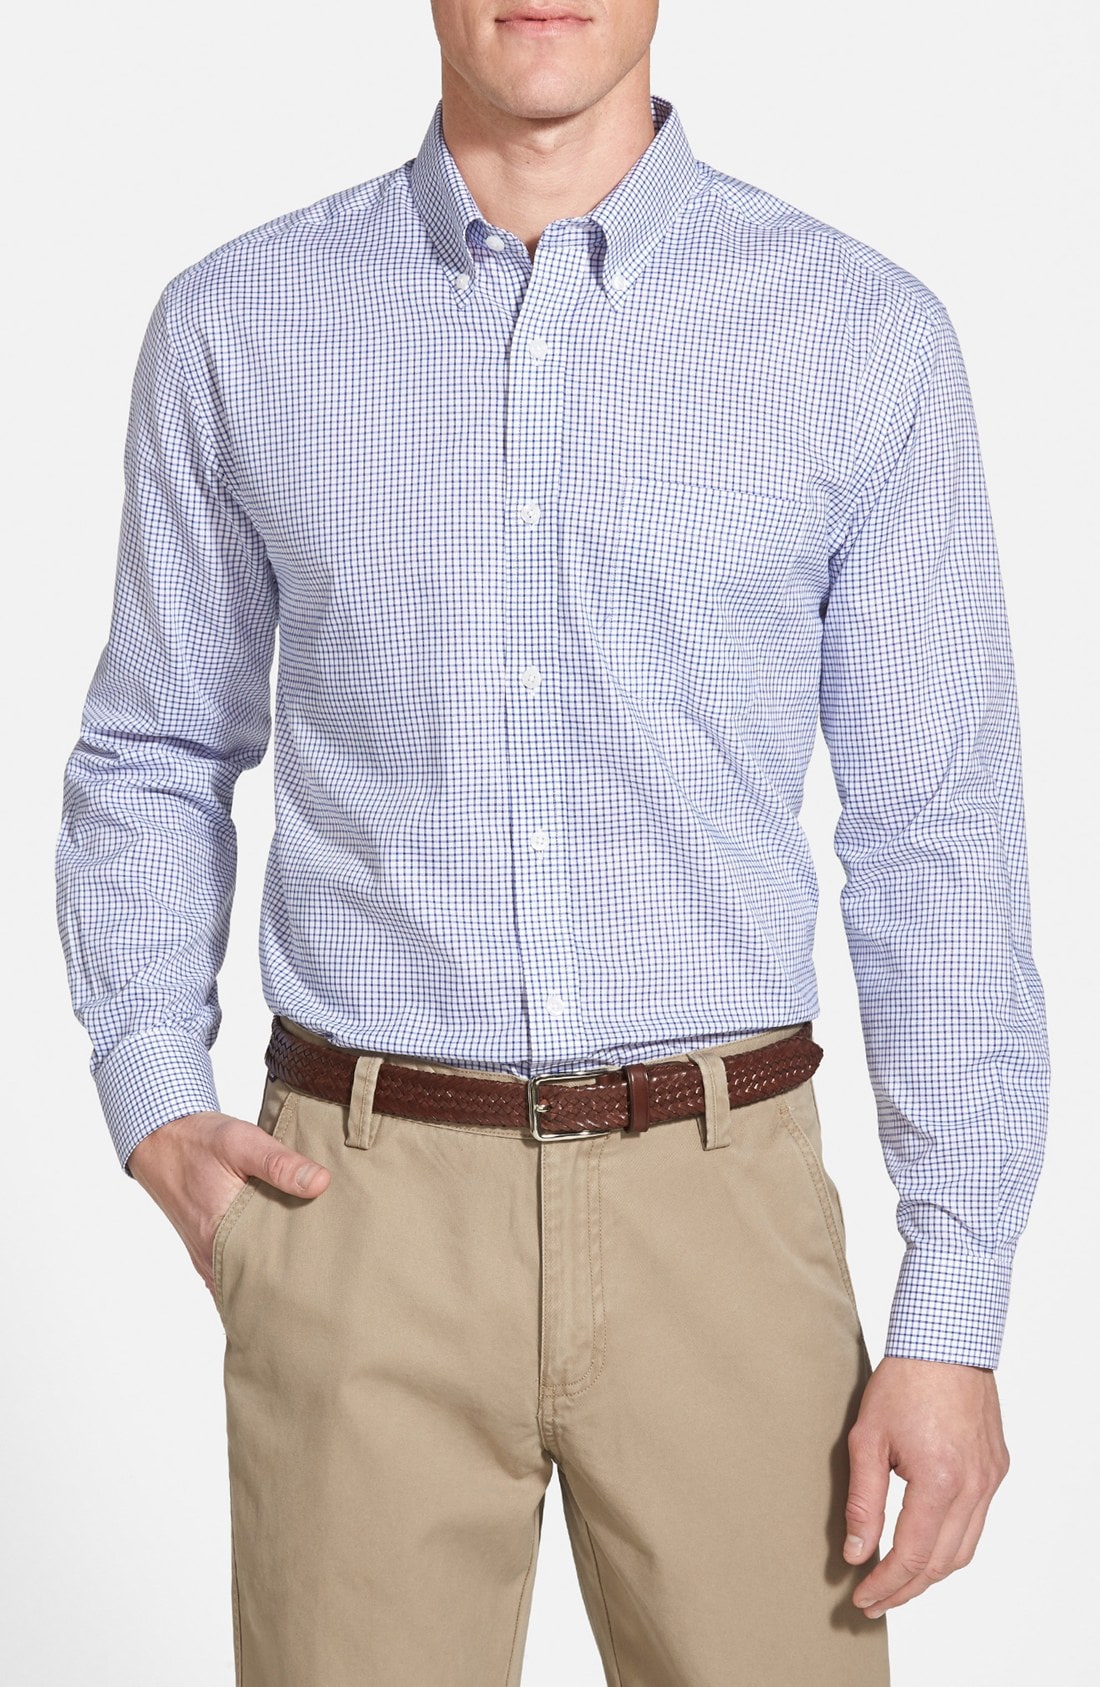 Cutter & Buck 'Epic Easy Care' Classic Fit Wrinkle Free Tattersall Plaid Sport Shirt (Online Only)